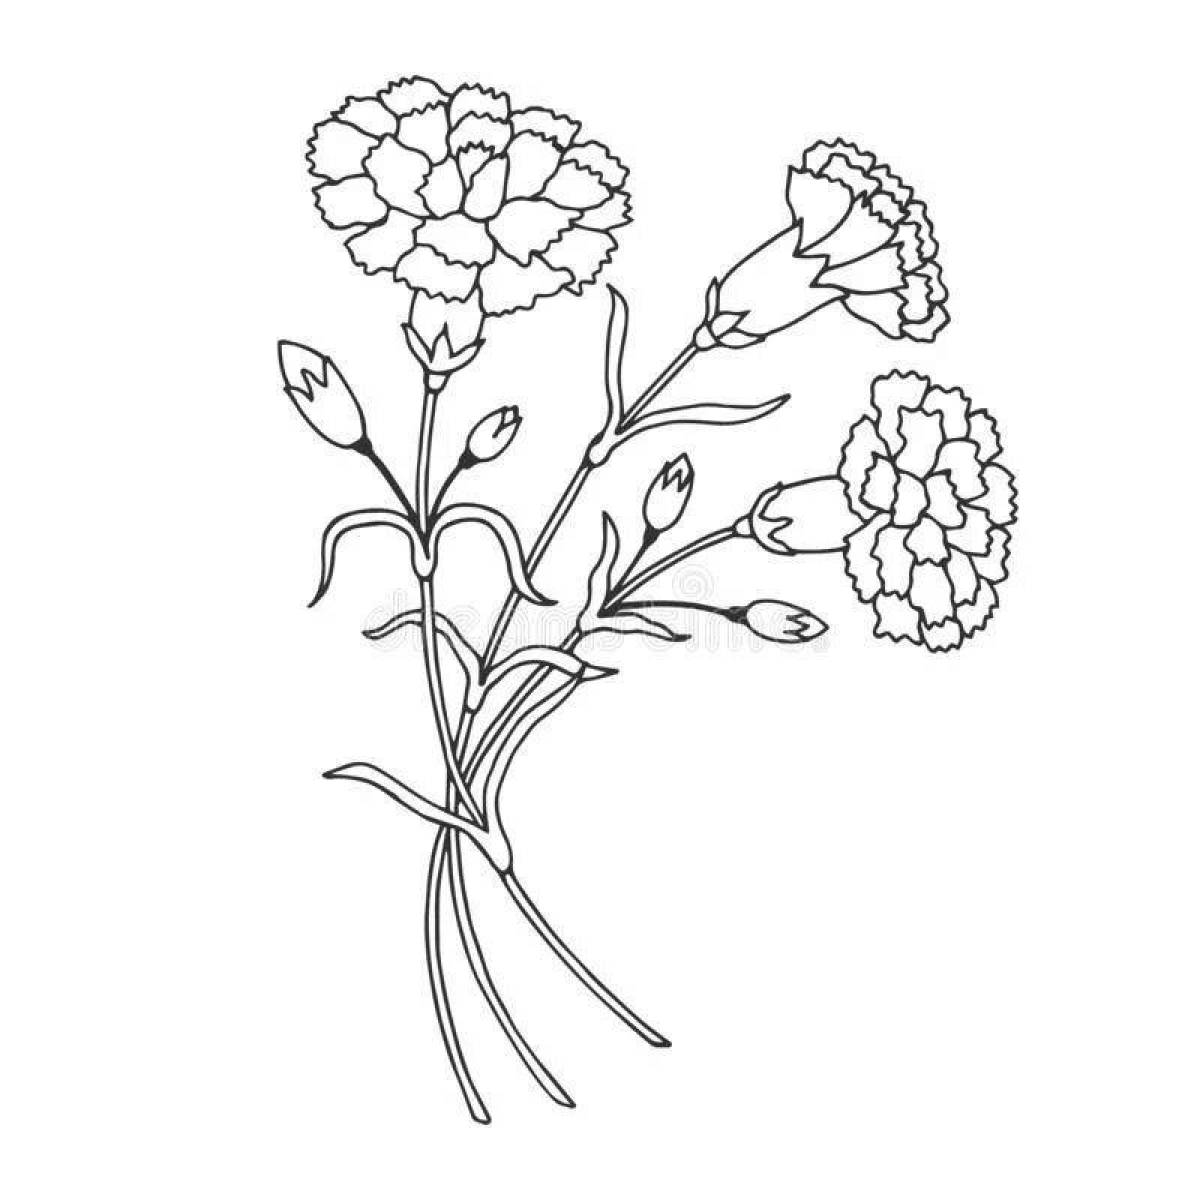 Adorable carnation coloring book